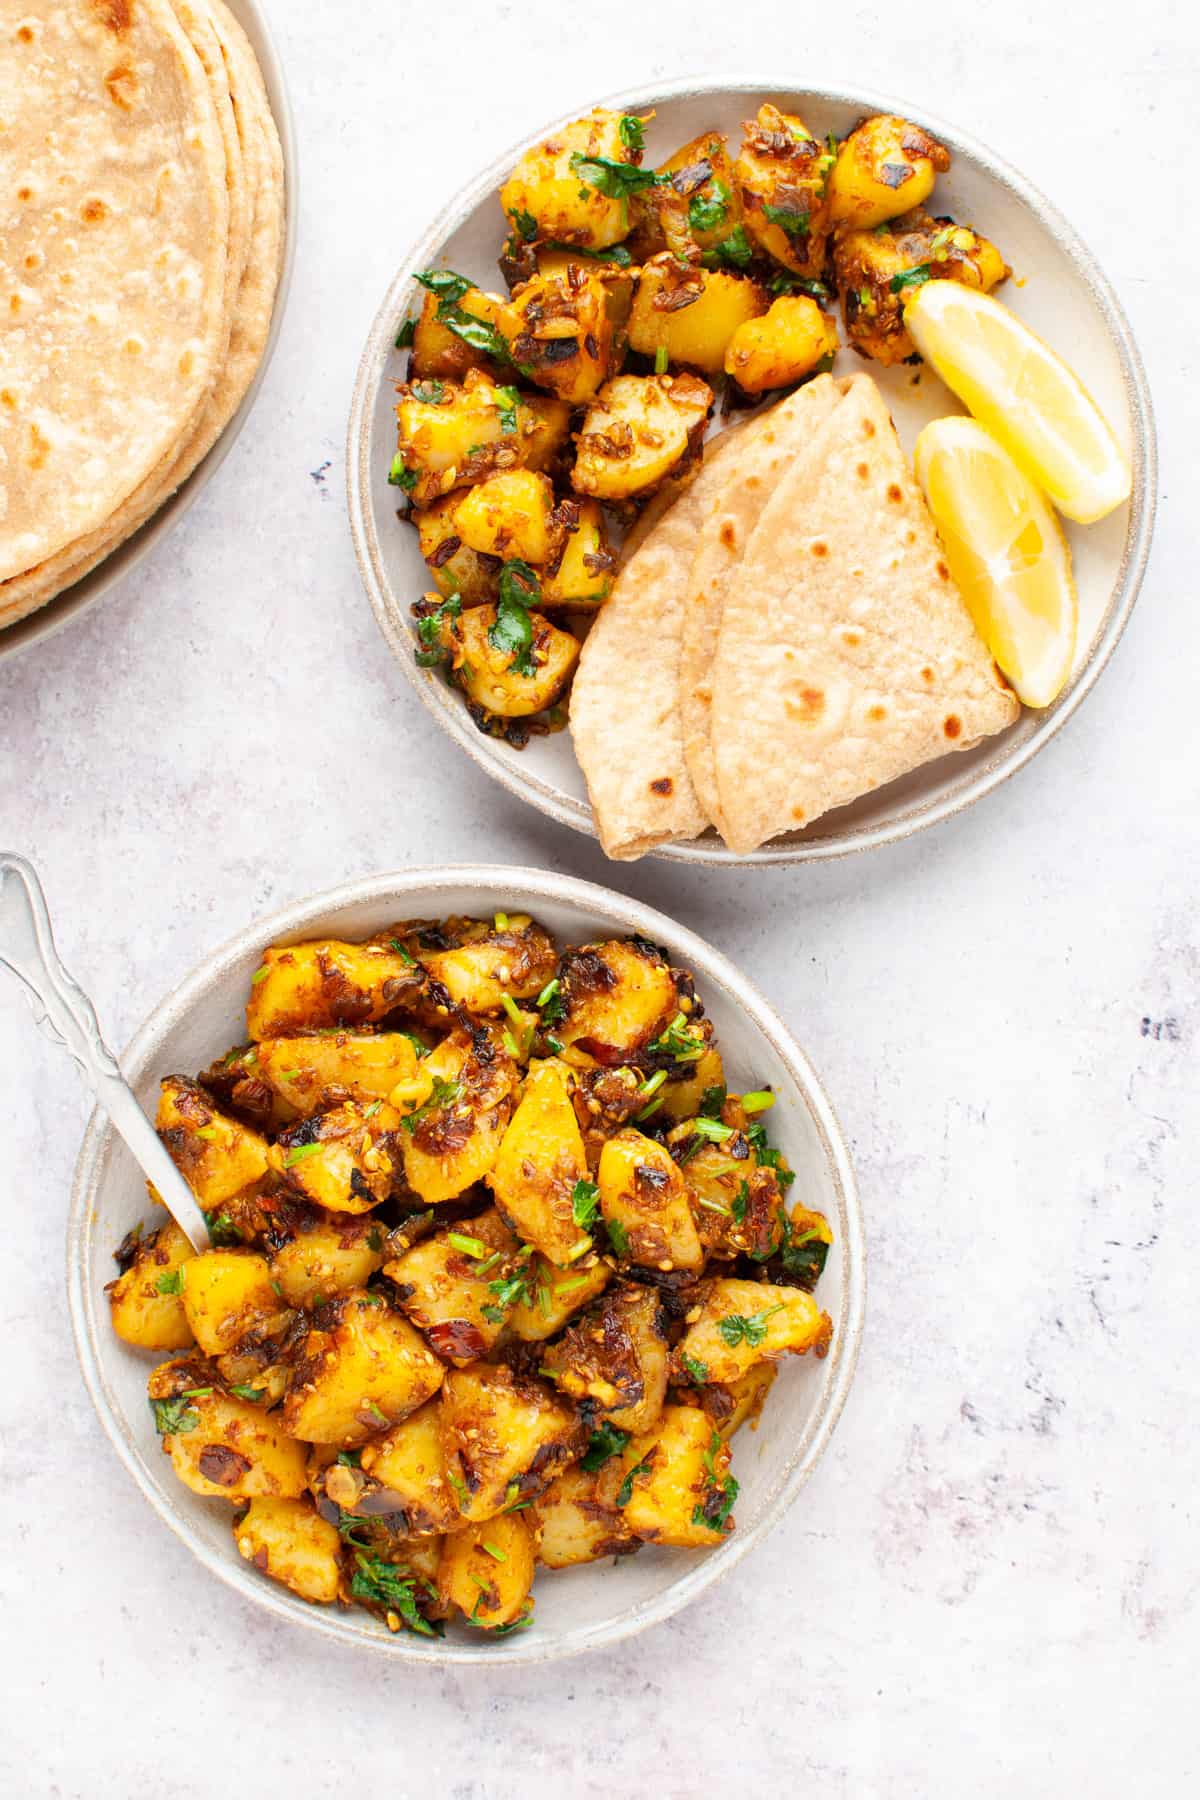 A plate with aloo sabzi and spoon; another plate with aloo sabzi, roti, and lemon wedges.